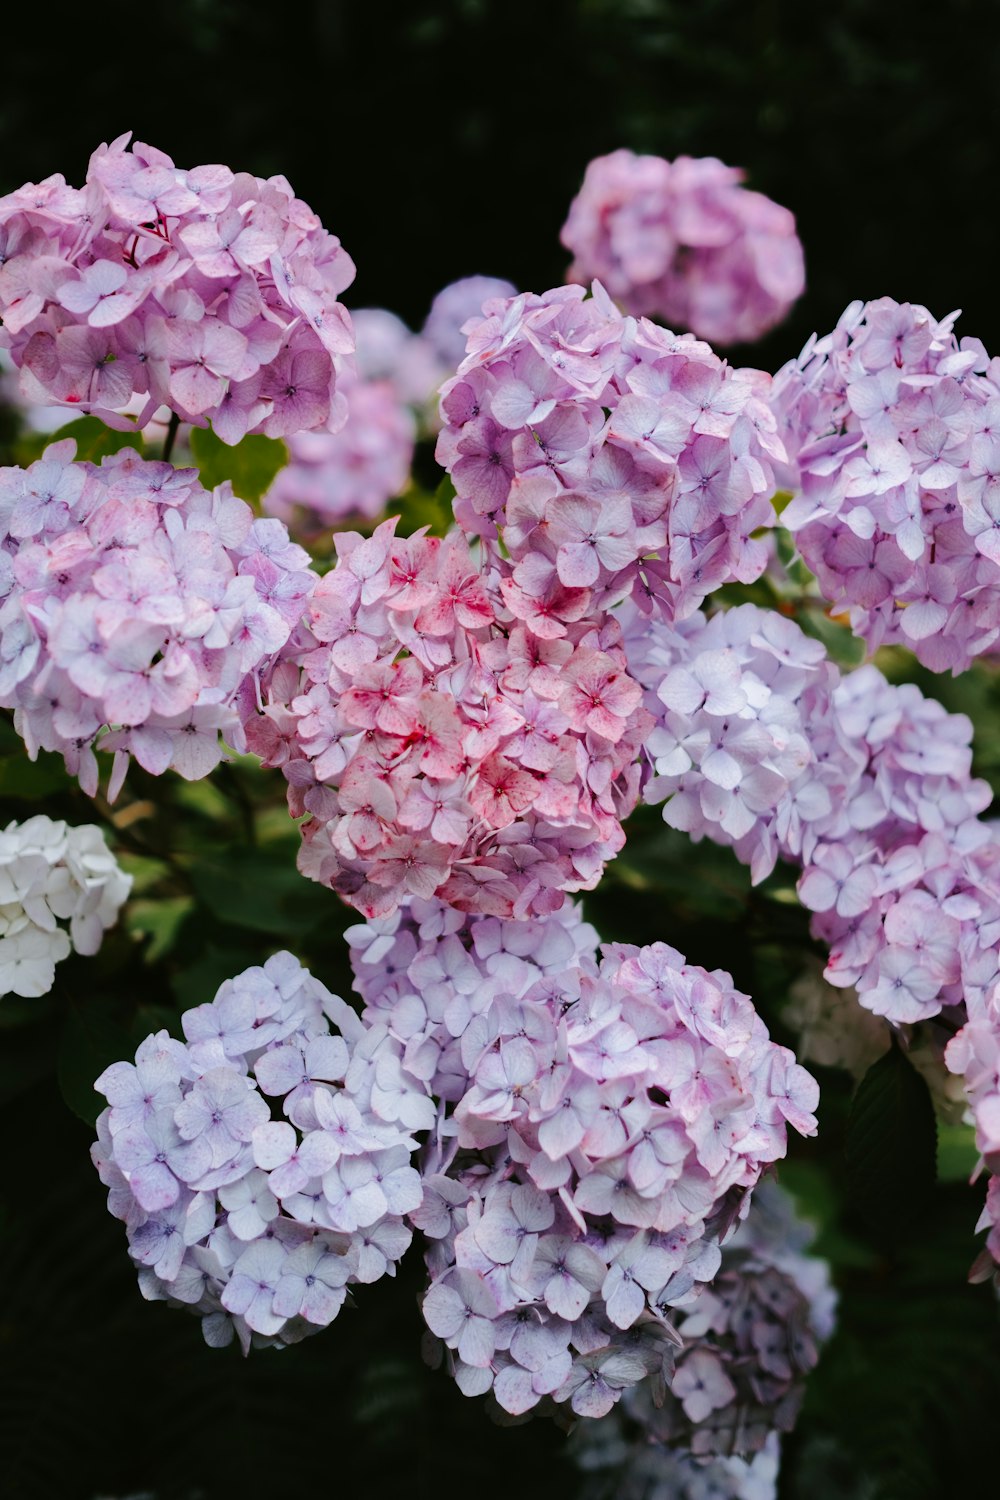 closeup photo of purple and pink flowers